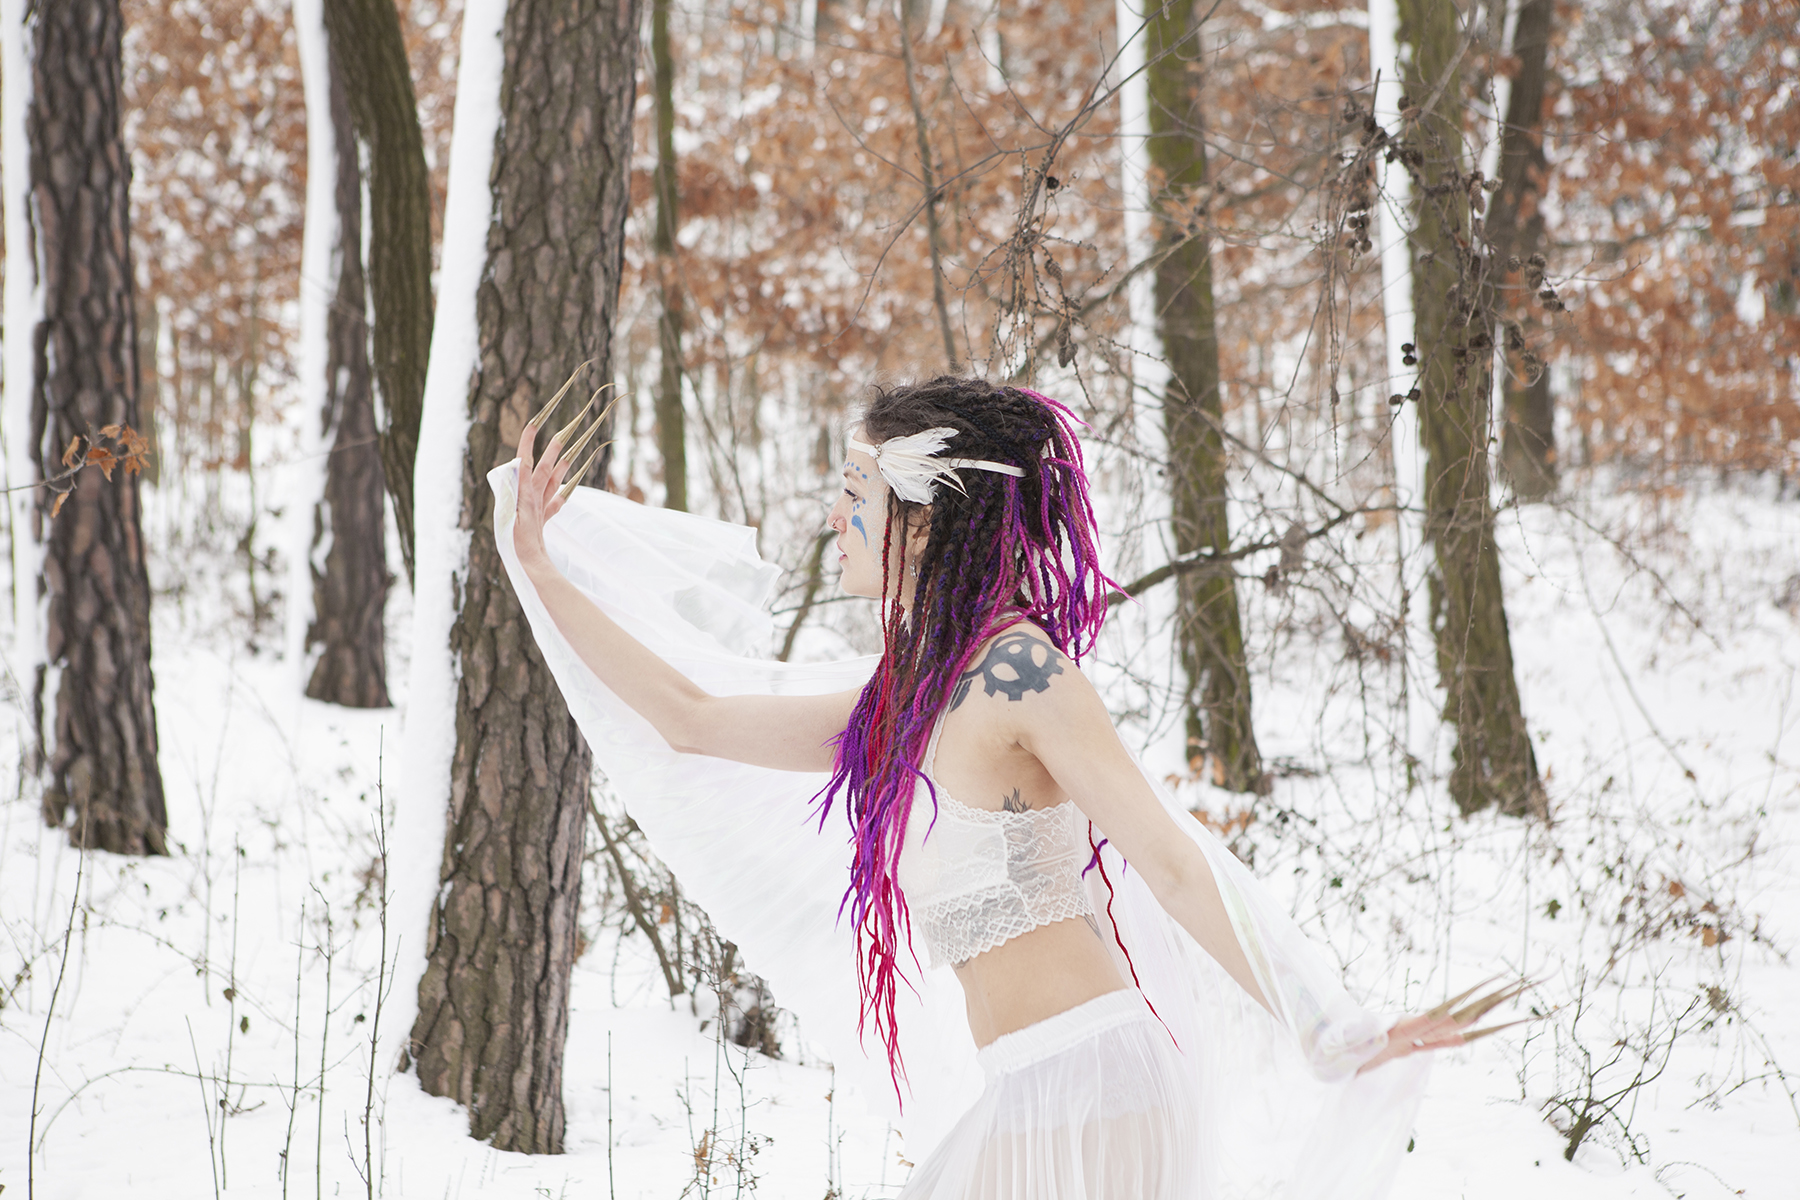 A photo of a purple hair fairy, wearing white, dancing in the forest in the sone